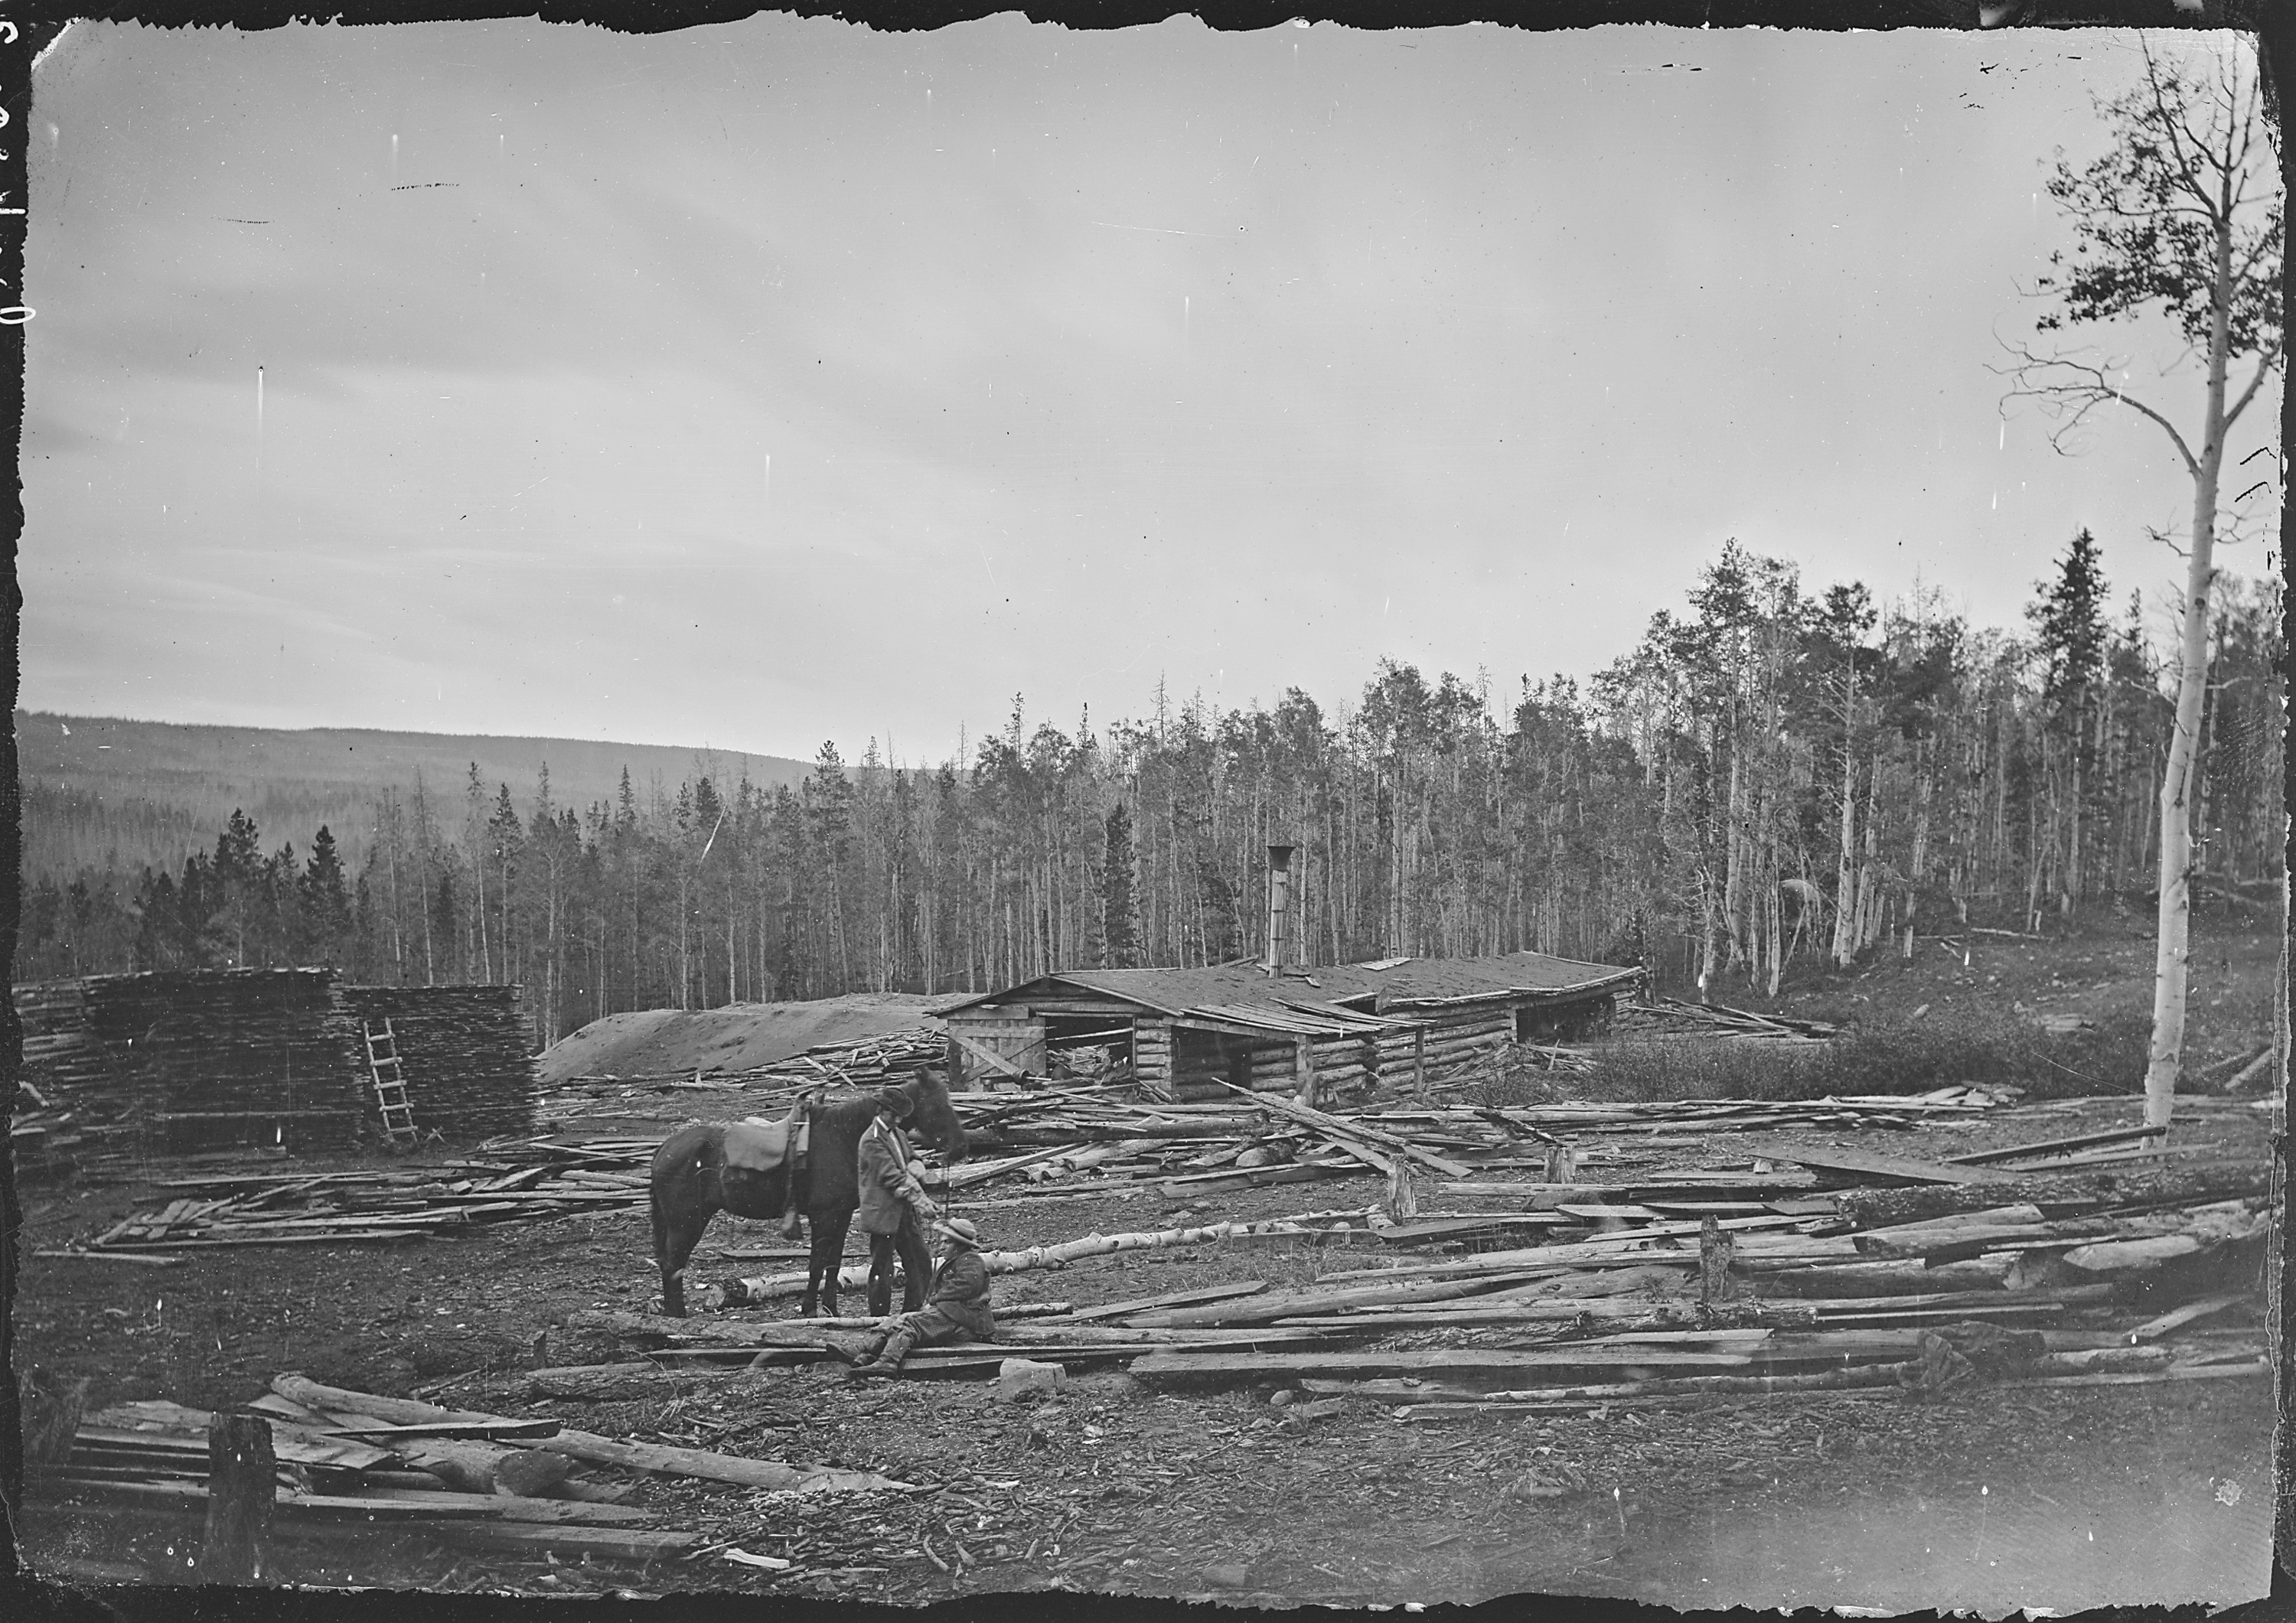 A saw mill in the Uinta Mountains, Summit County, Utah - NARA - 516920